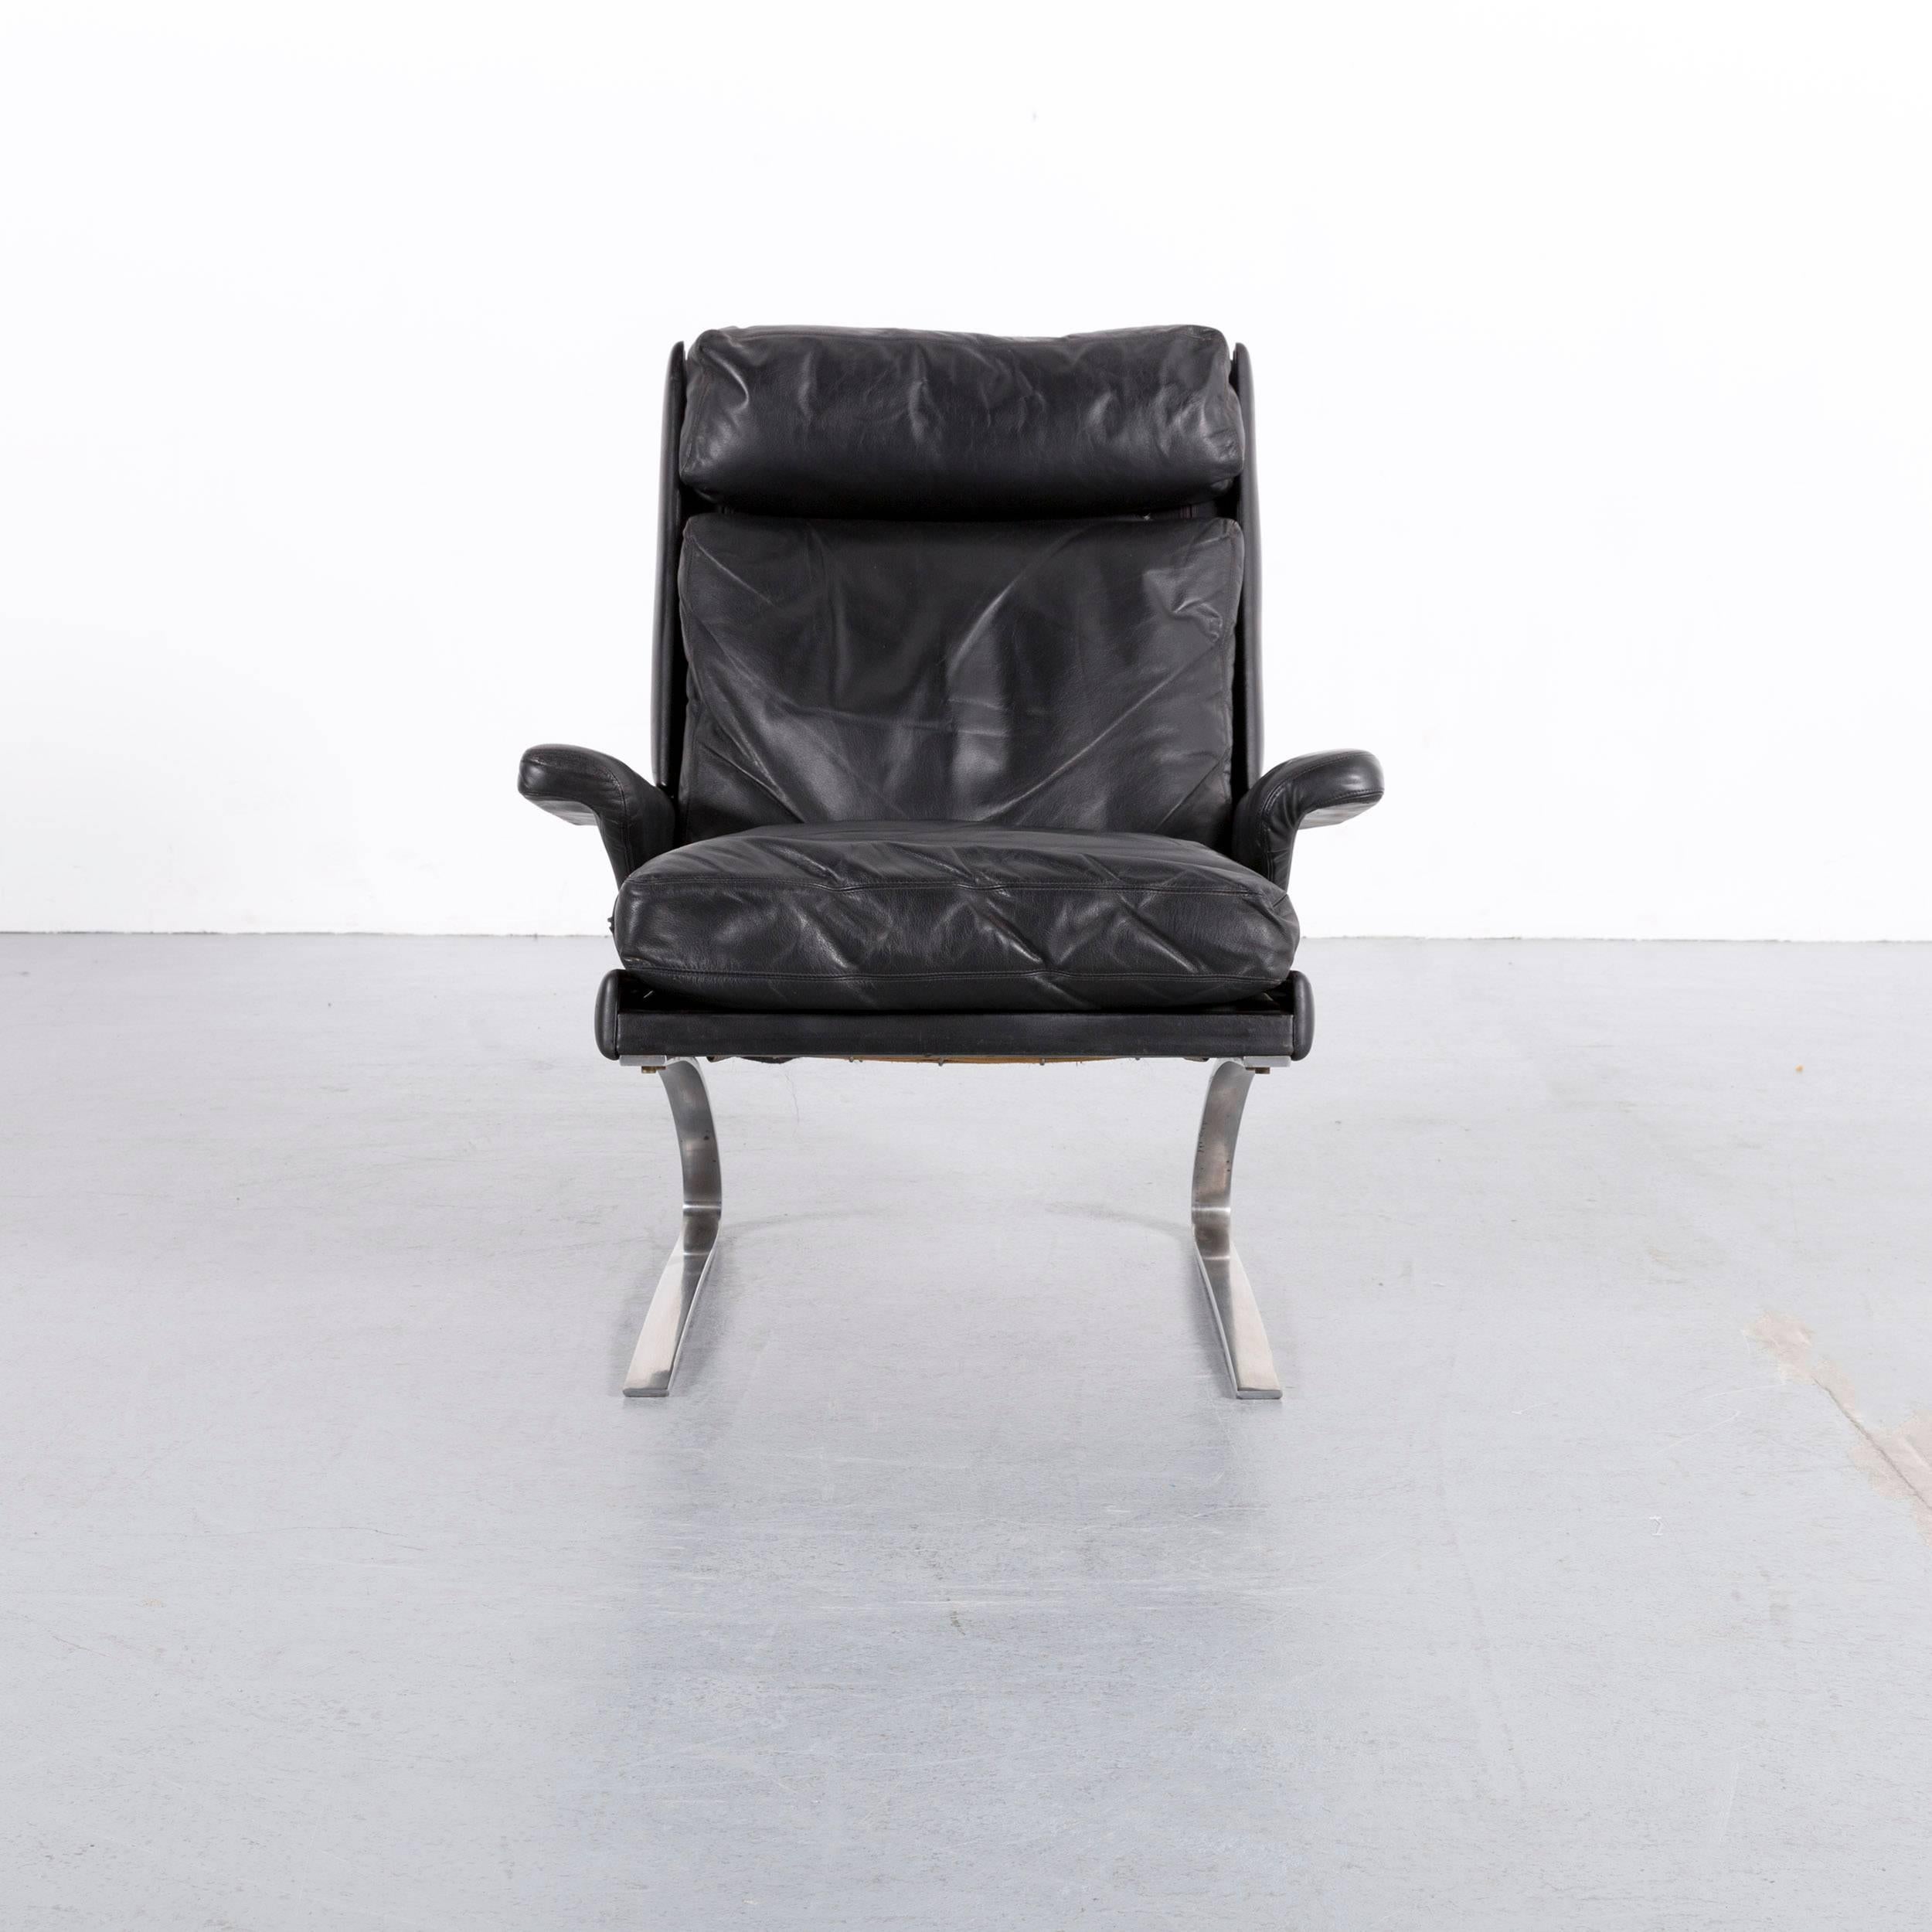 We bring to you an COR Swing leather armchair black one-seat.














